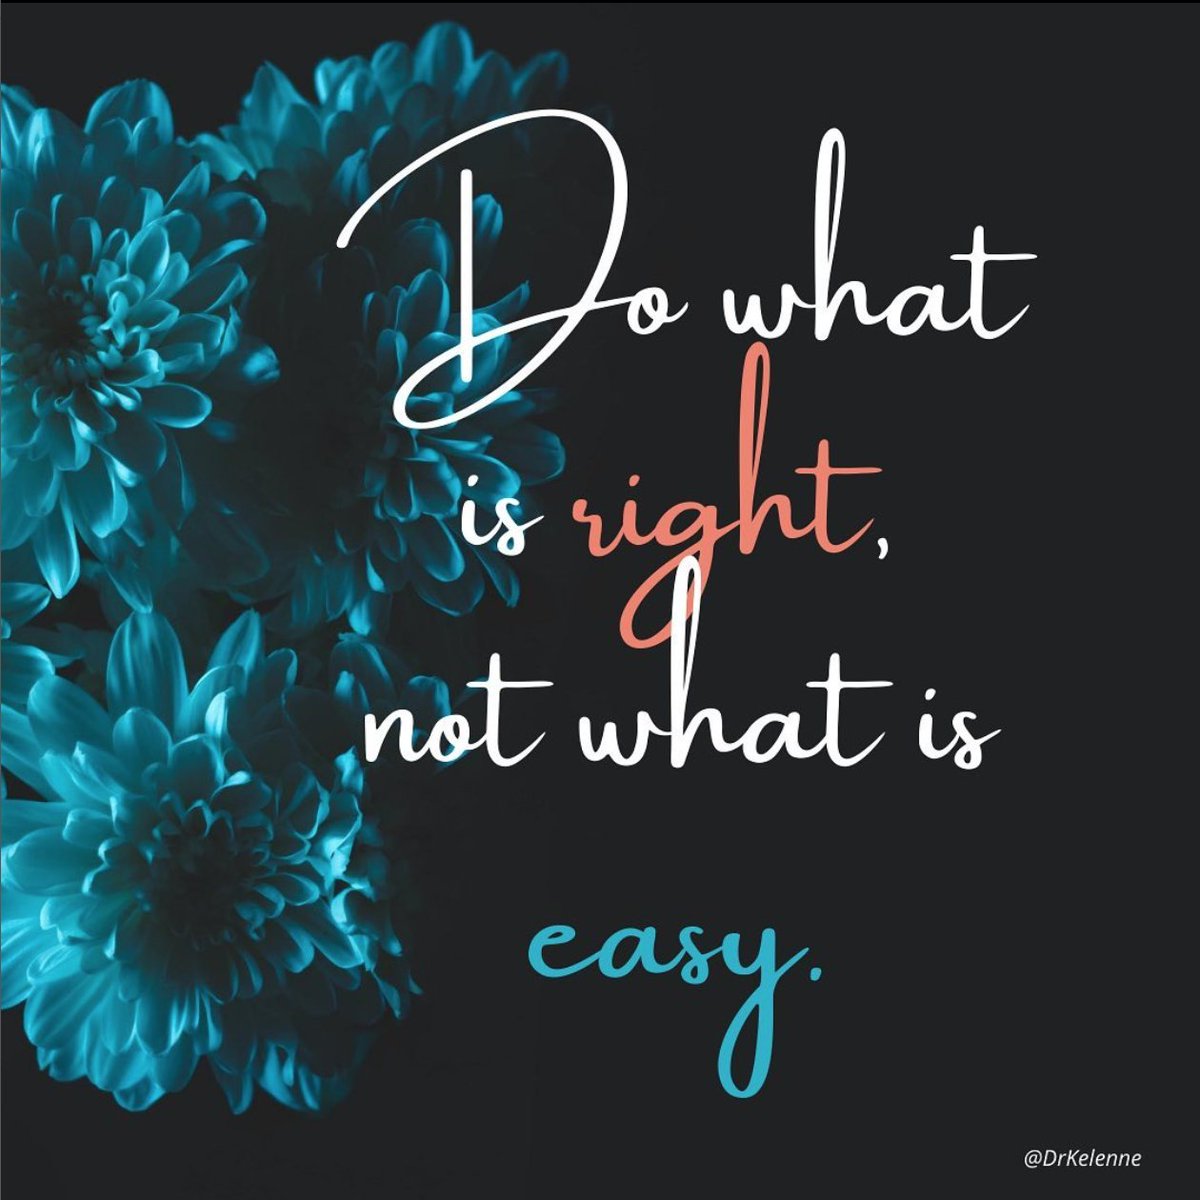 RT @DrKelenne: Not because it's easy doesn't mean it's right. Always choose what is right over what is easy. #dailymotivation #irie #familymedicine #singleparent #caribbean #WestIndian #functionalmedicine #blackdoctor #telemedicine #yourcaribbeandoct…